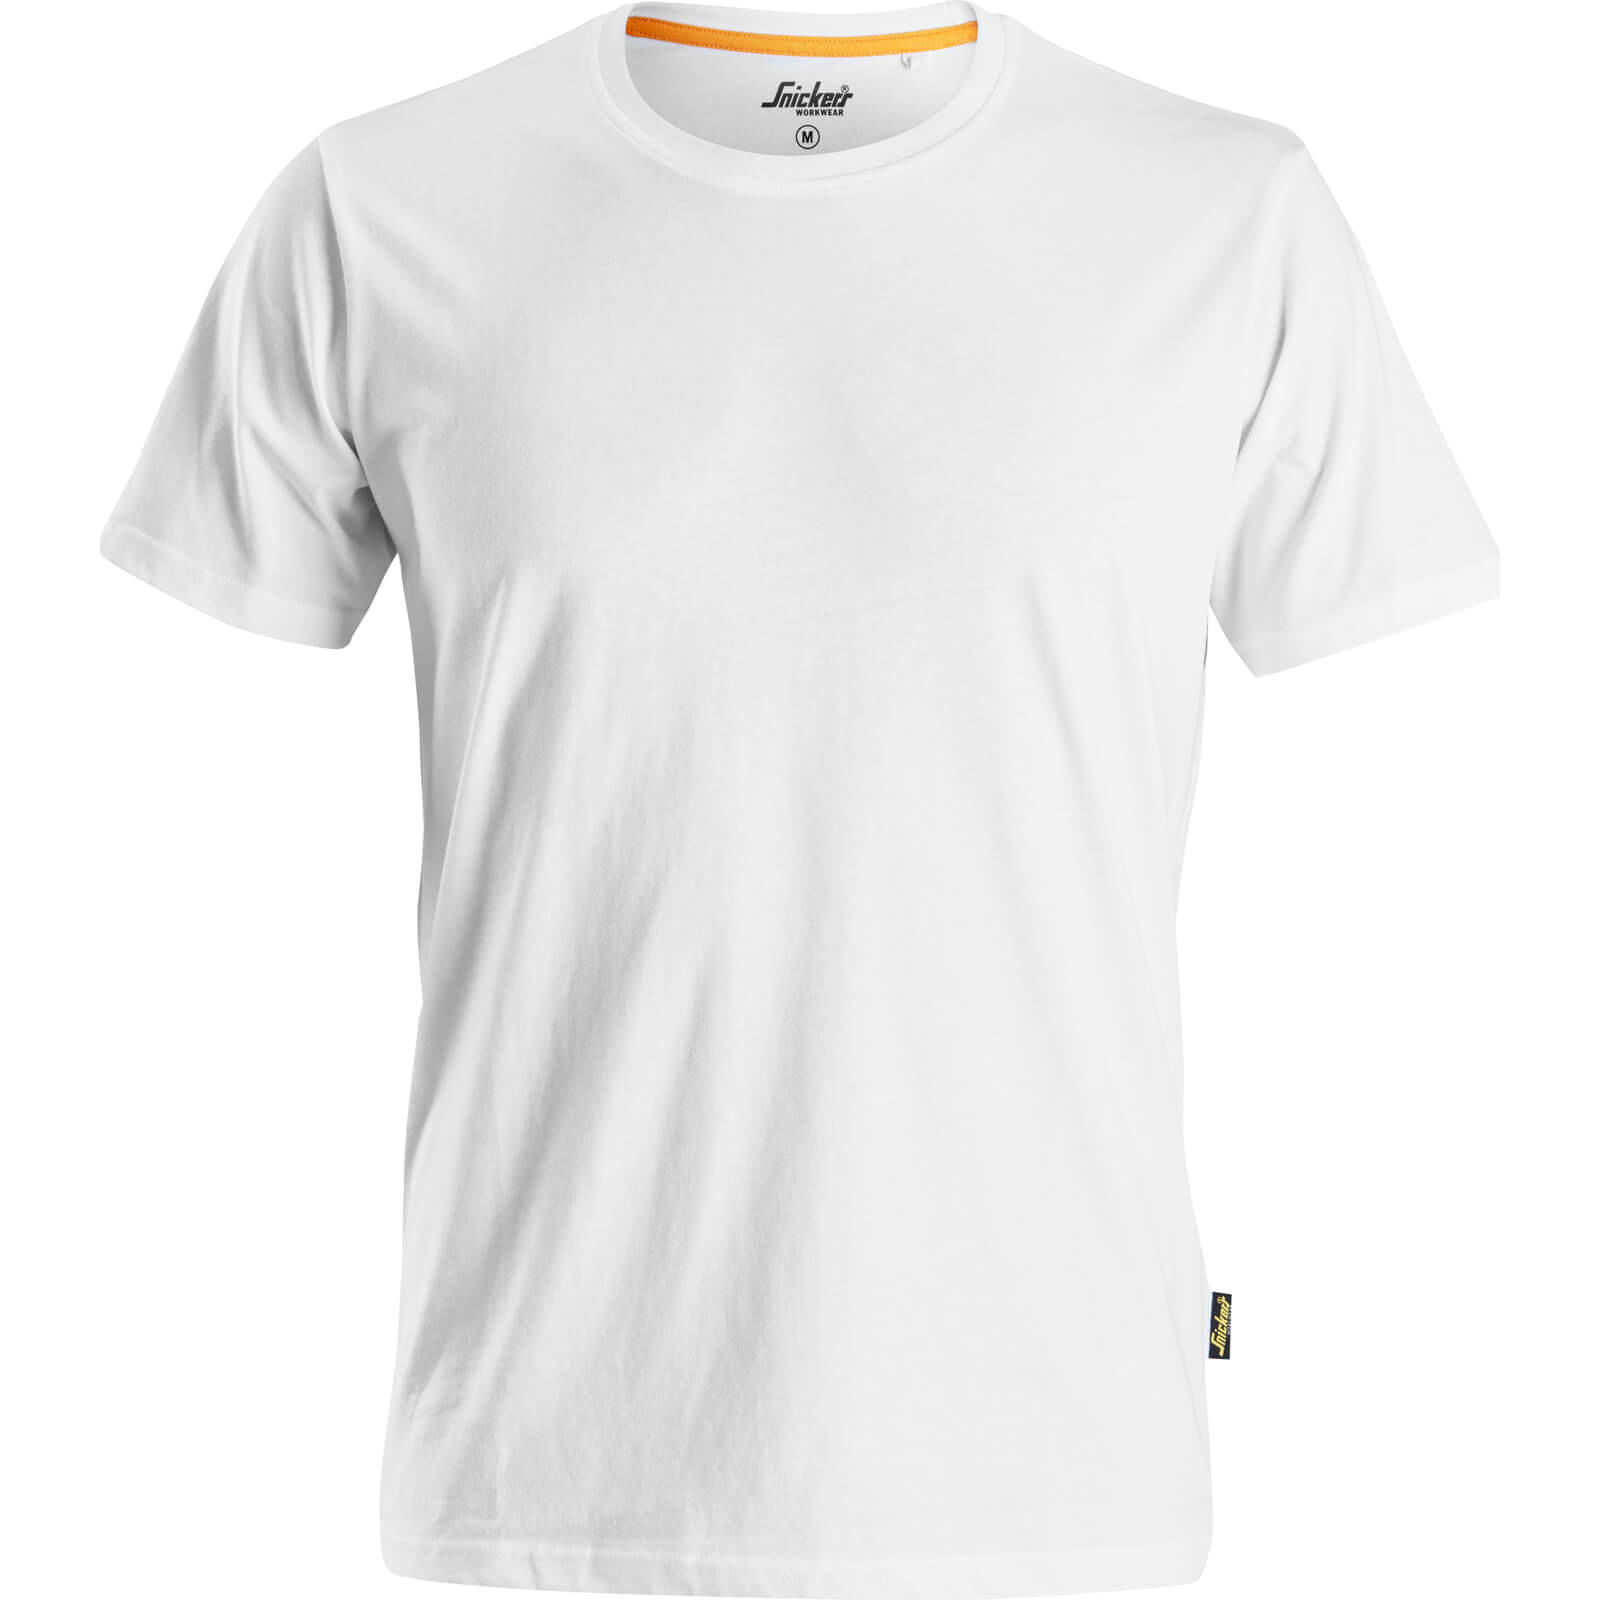 Image of Snickers Allround Work Organic Cotton T Shirt White 2XL